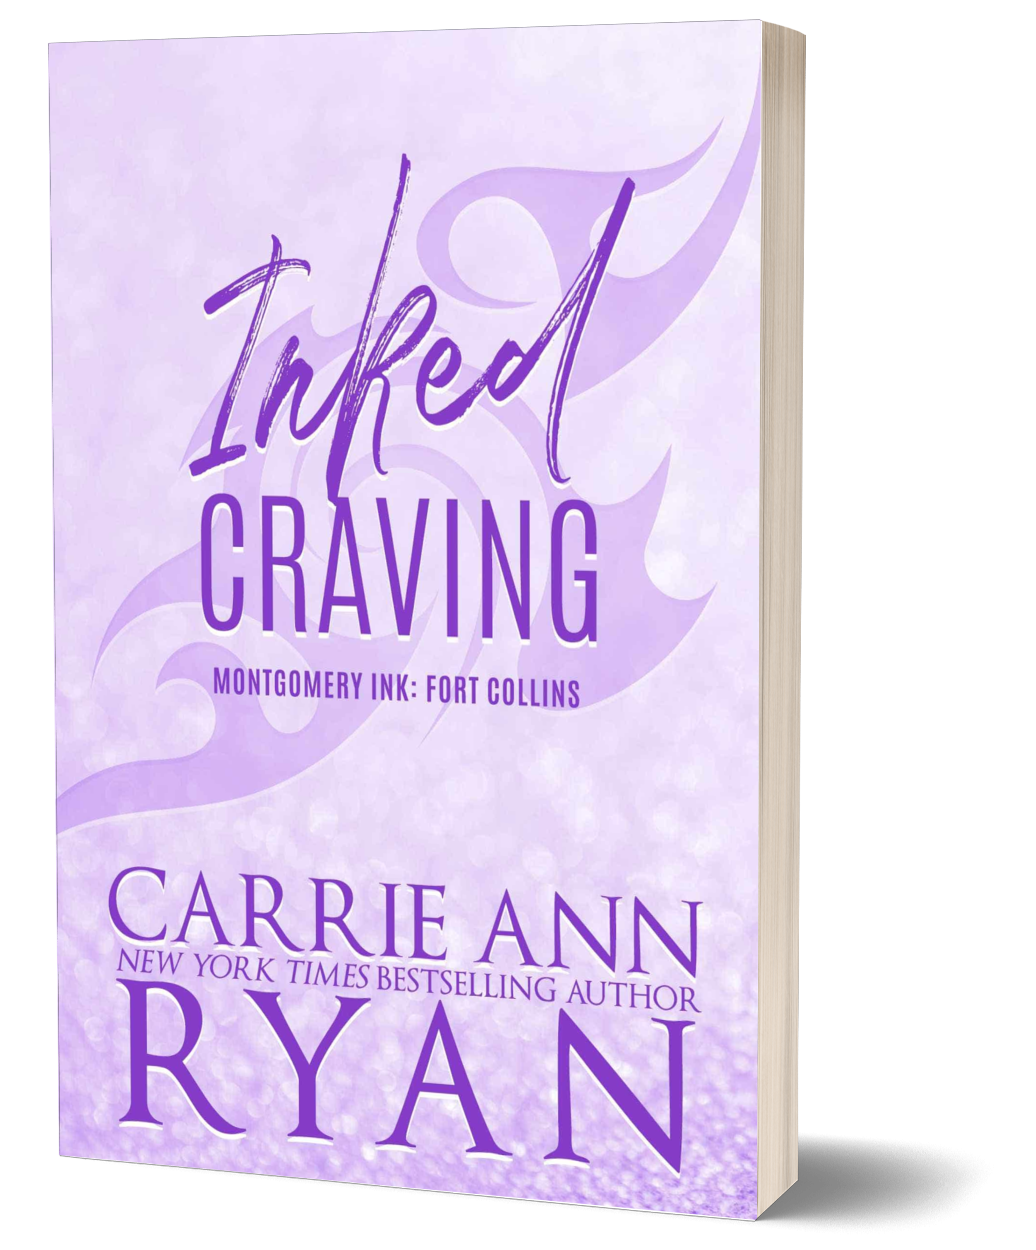 Inked Craving - Special Edition Paperback